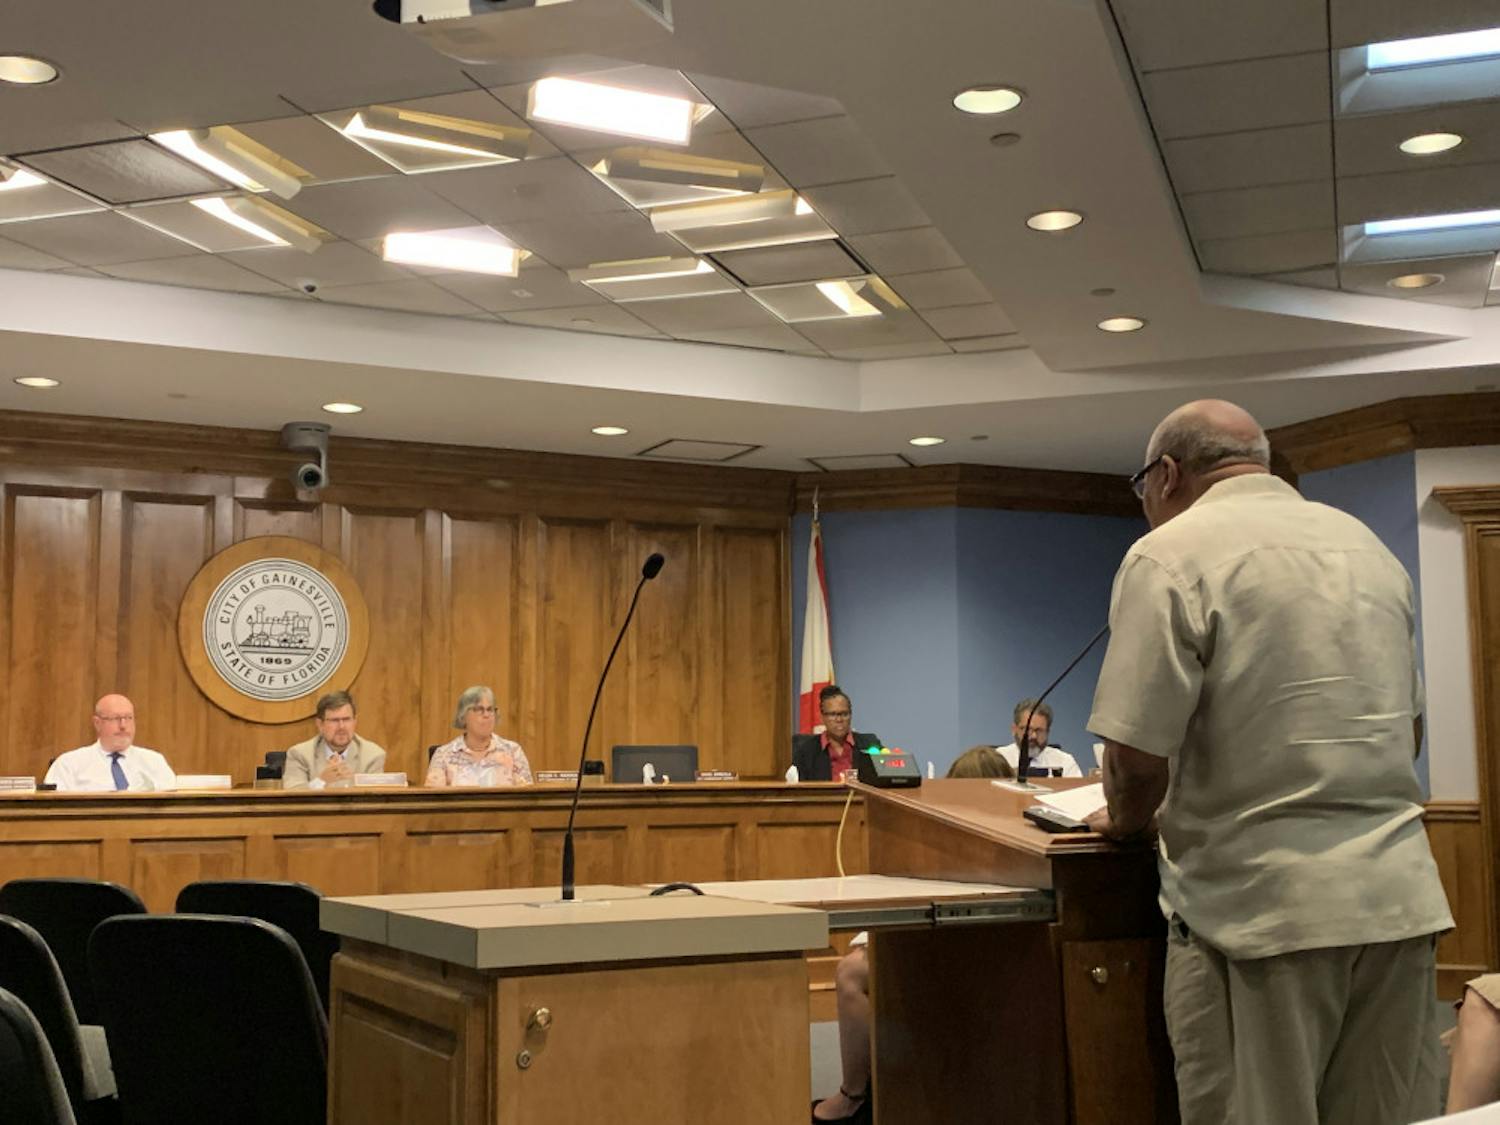 Aaron Green, a 73-year-old Gainesville resident, speaks to the city commission Thursday night about polystyrene cups and containers. Green said the discussions about possibly banning single-use plastics was affecting his business, Fletcher’s Cocktail Lounge, which is located at 619 NW 5th Ave.